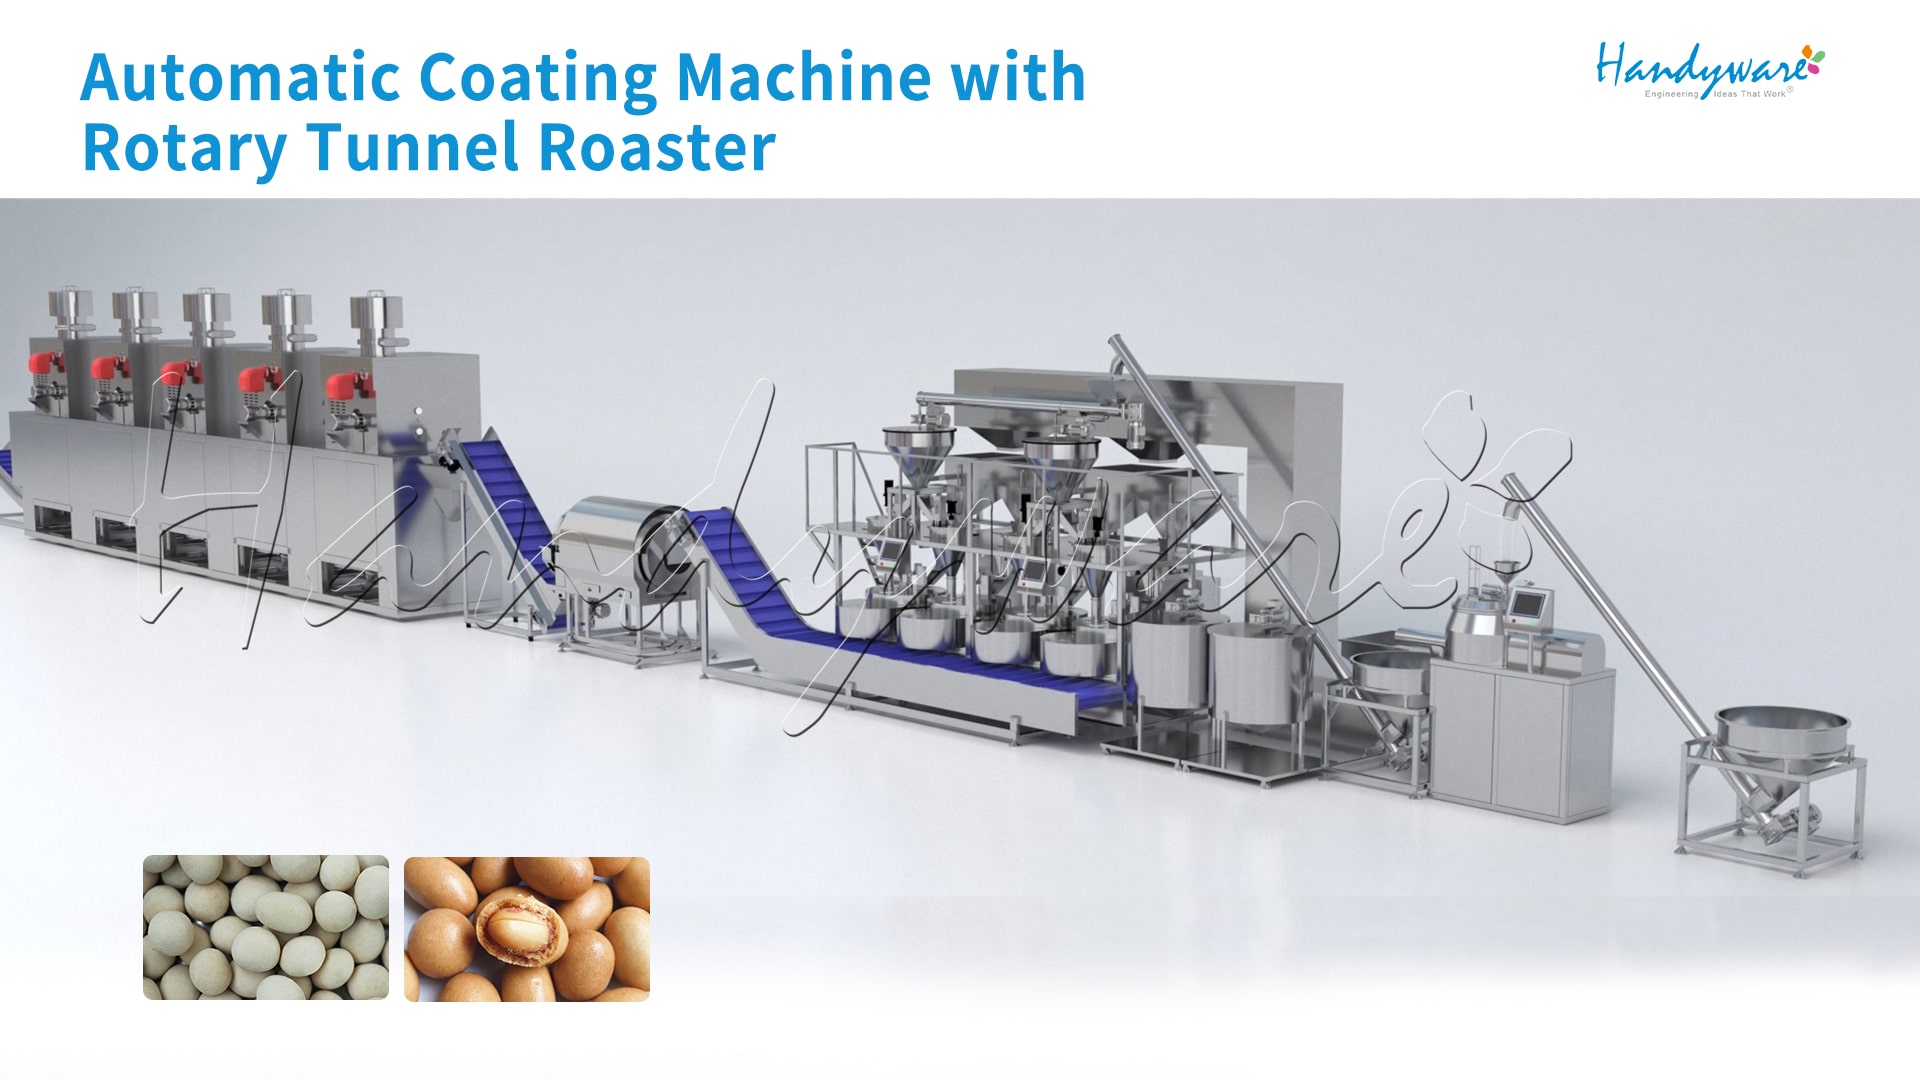 Automatic Coating Machine with Rotary Tunnel Roaster